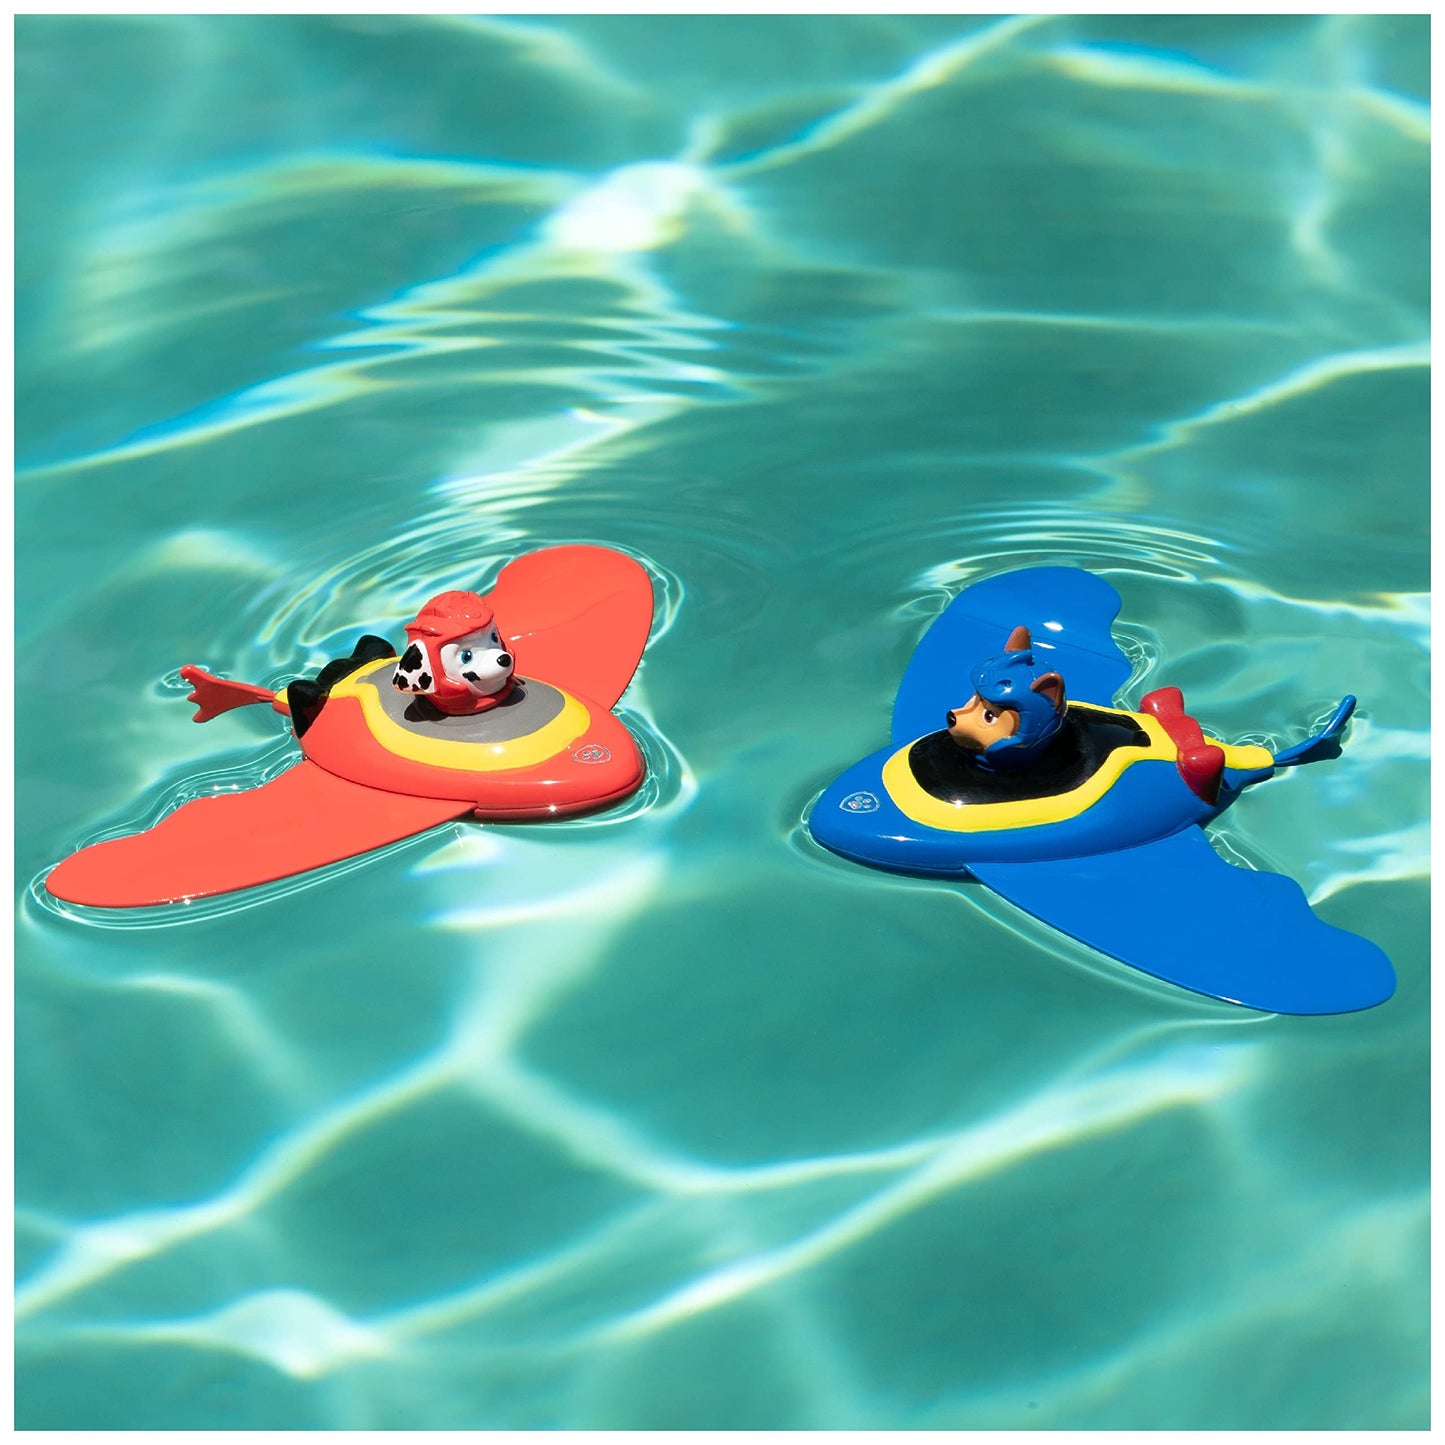 SwimWays Paw Patrol Zoom-A-Rays Water Toys, Kids Pool Toys & Diving Toys, Paw Patrol Party Supplies & Paw Patrol Toys for Kids Aged 5 & Up, 2-Pack 2pk Dive Toys